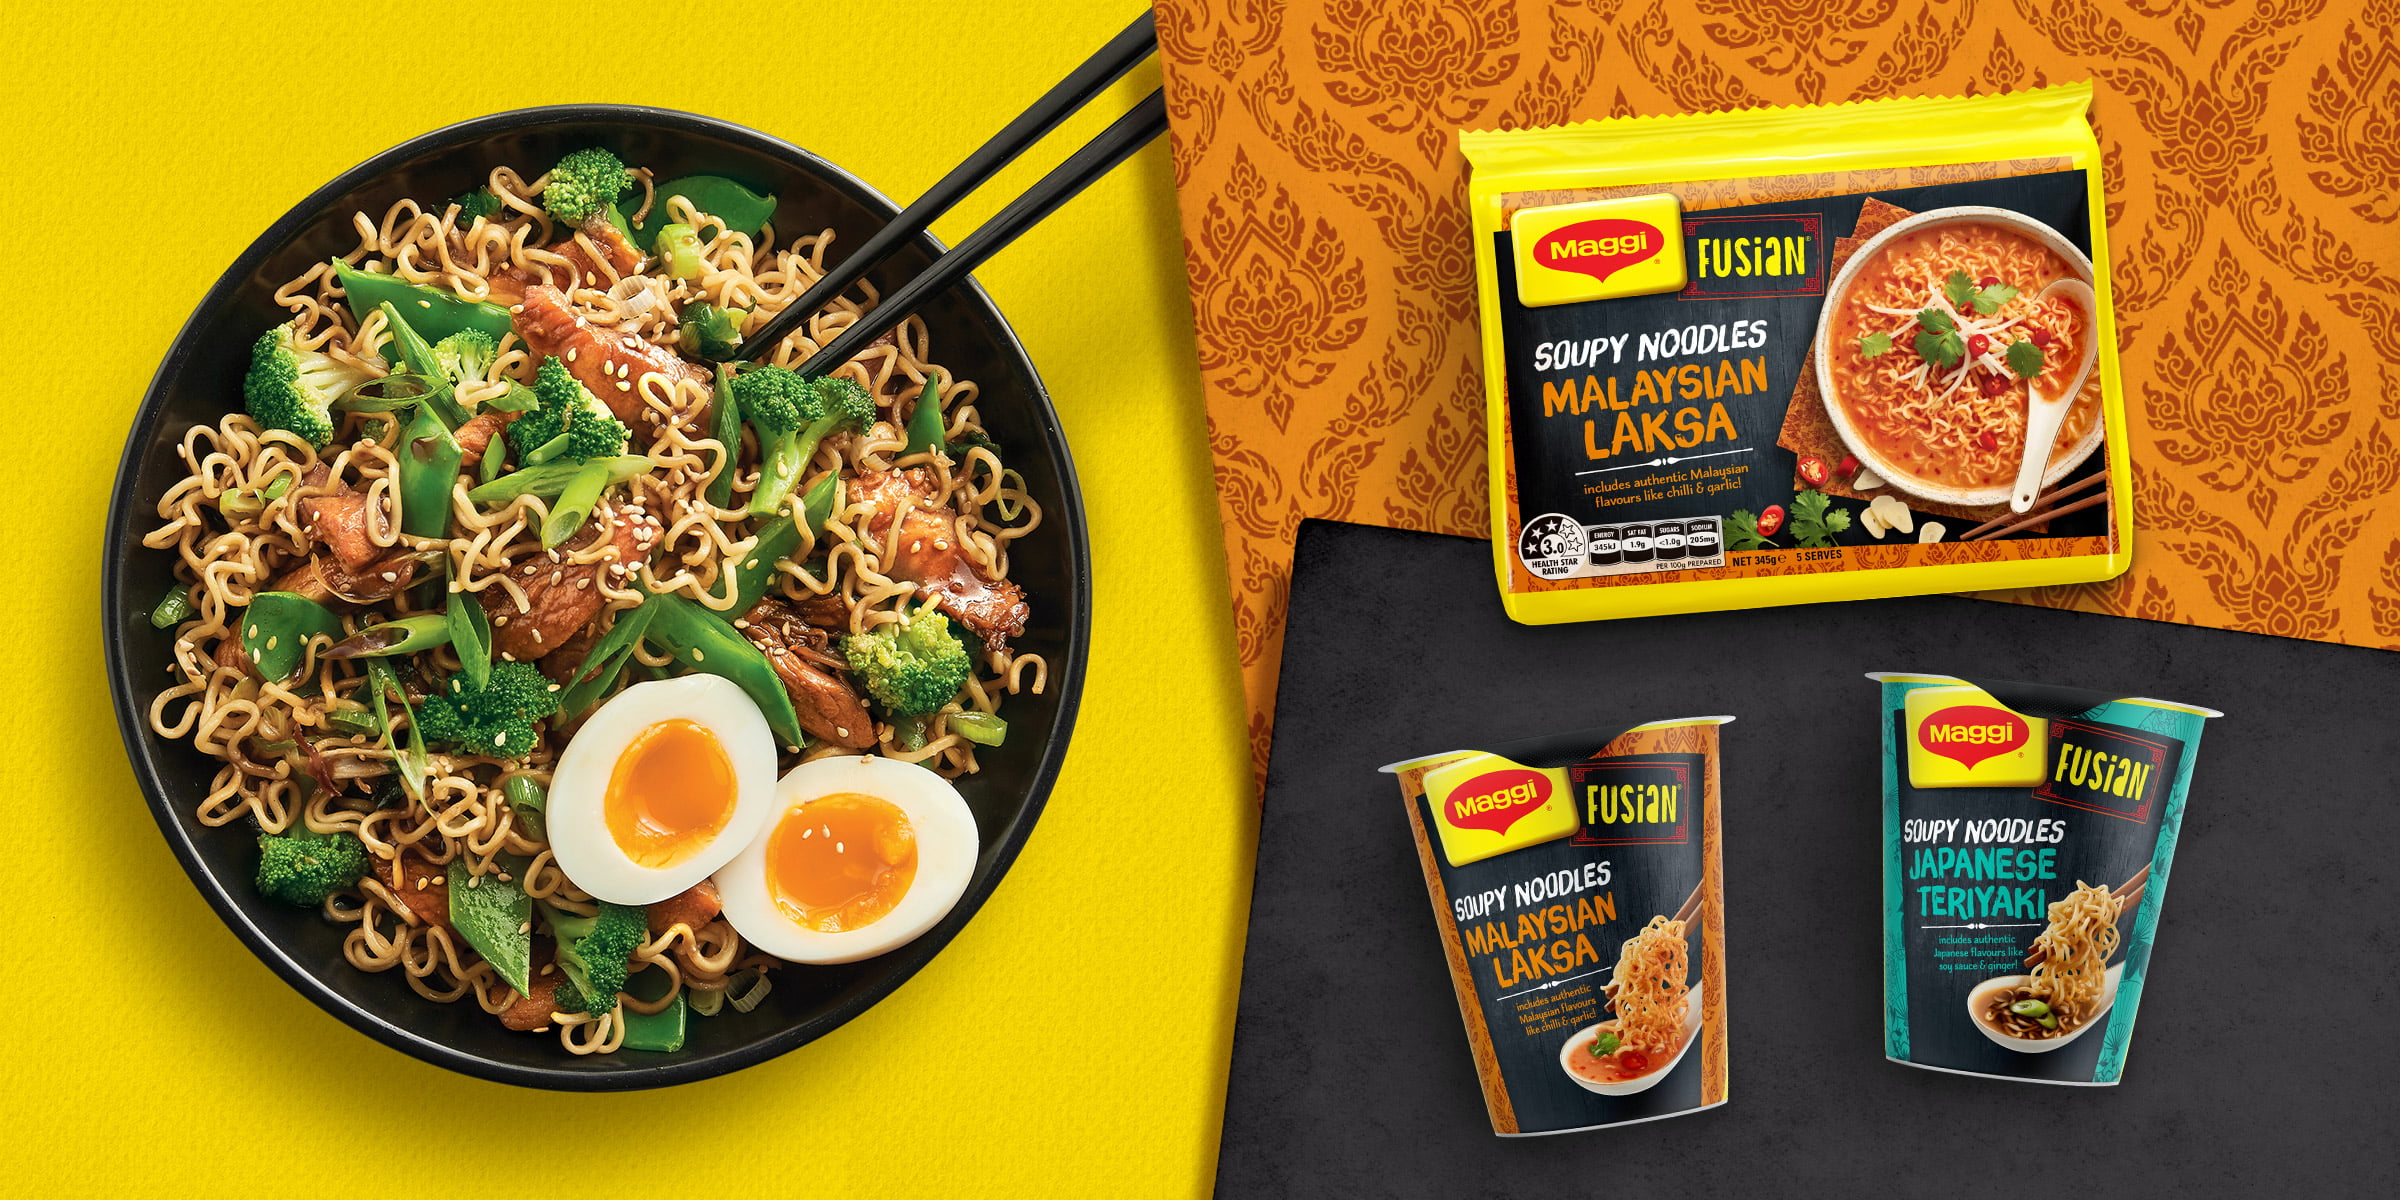 maggi-boxer-and-co-package-redesign-brand-fusion-sauces-noodles-cup-soup